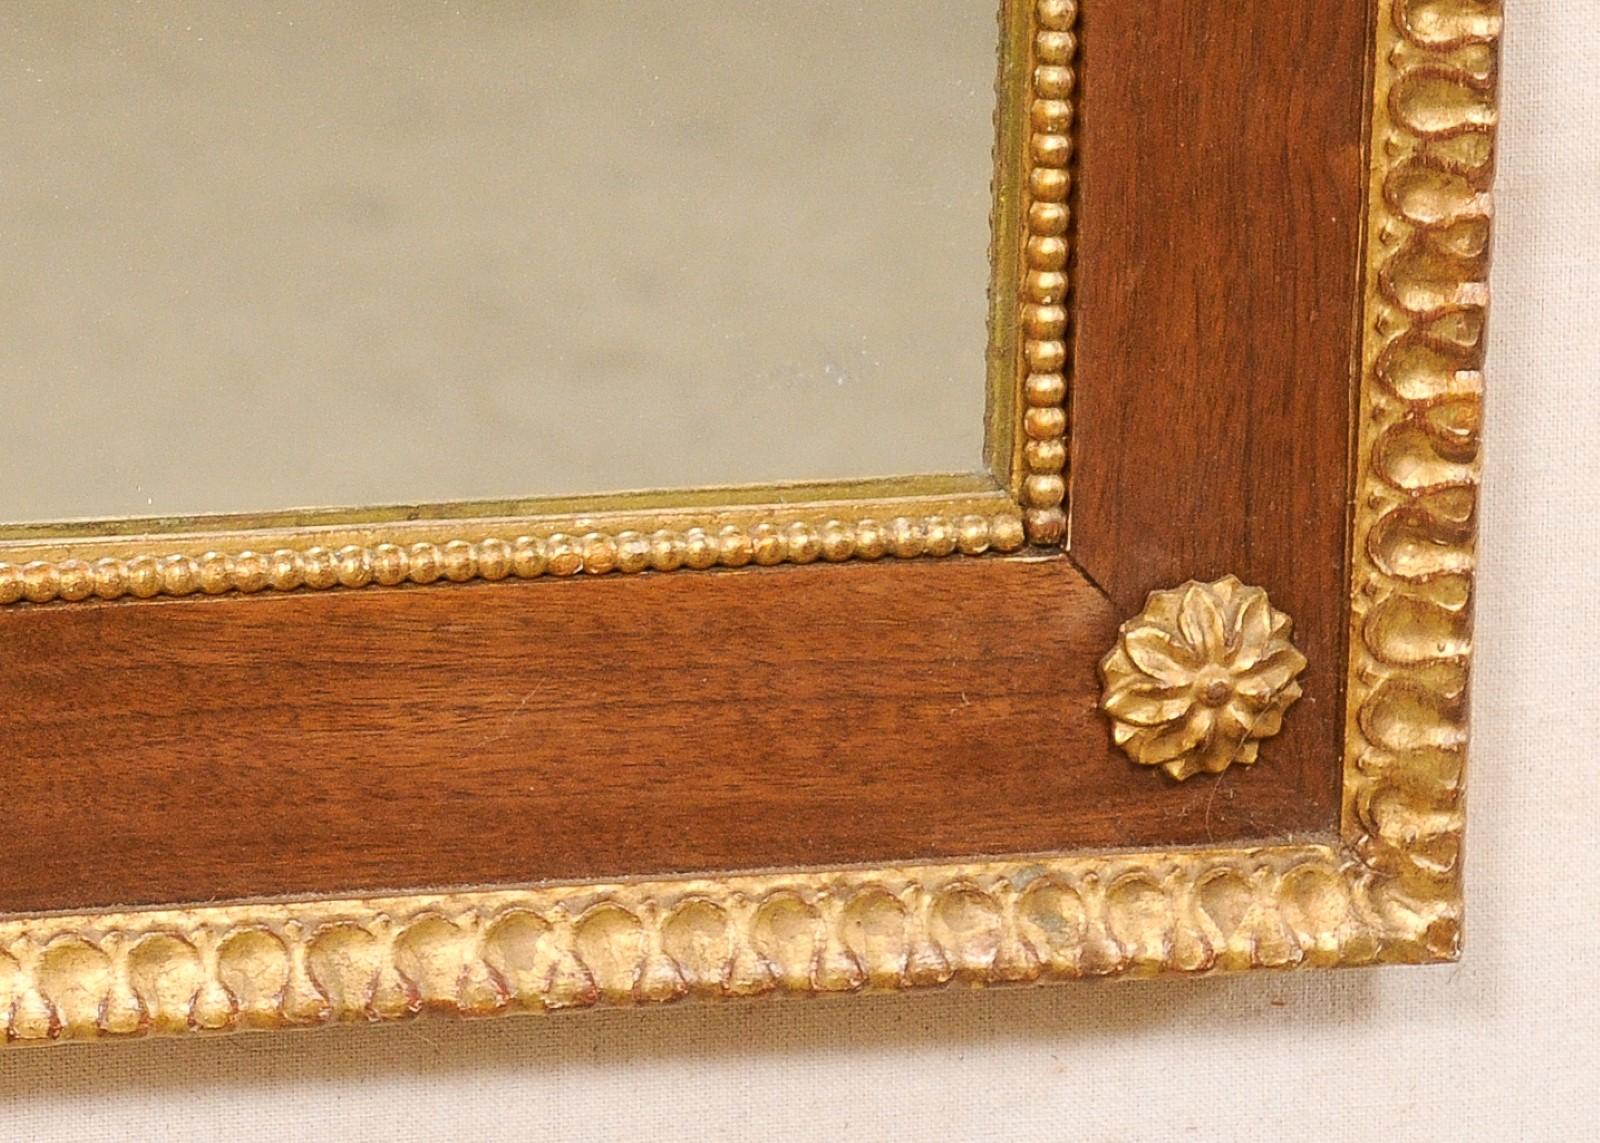 Italian Antique Trumeau Mirror w/Original Gilt Finish & Musical Themed Accents For Sale 1